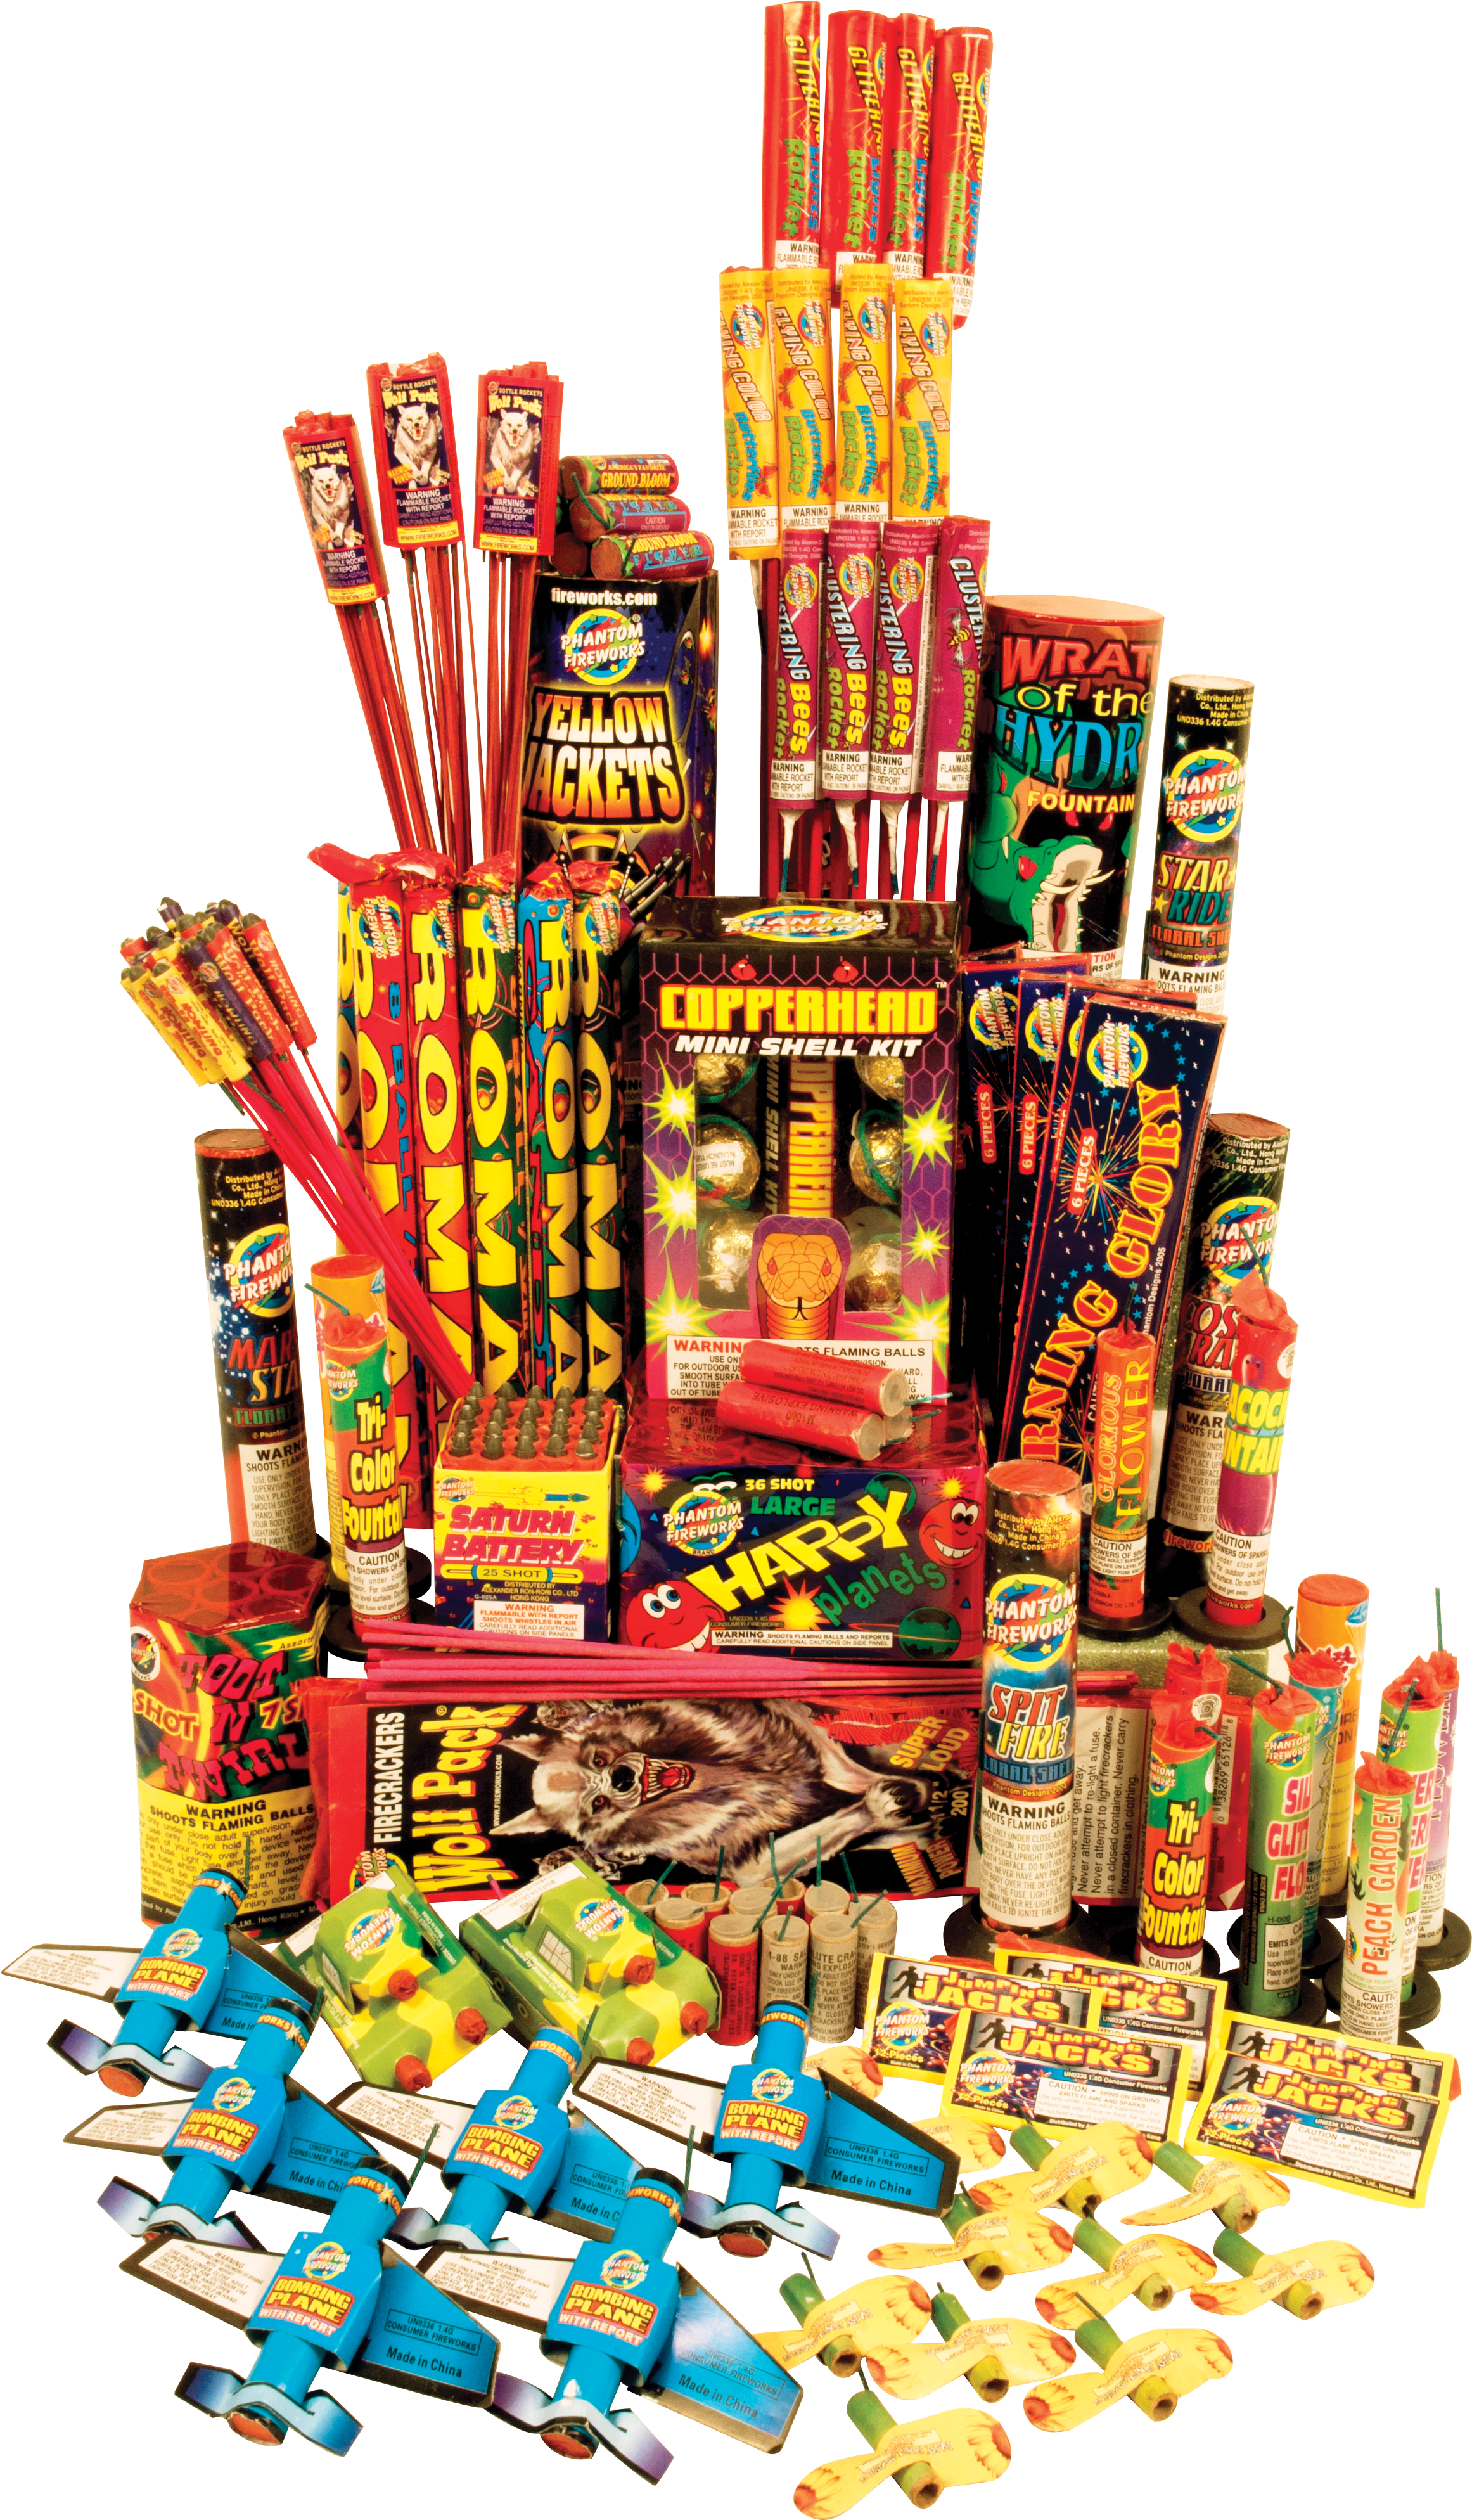 A Large Pile Of Fireworks